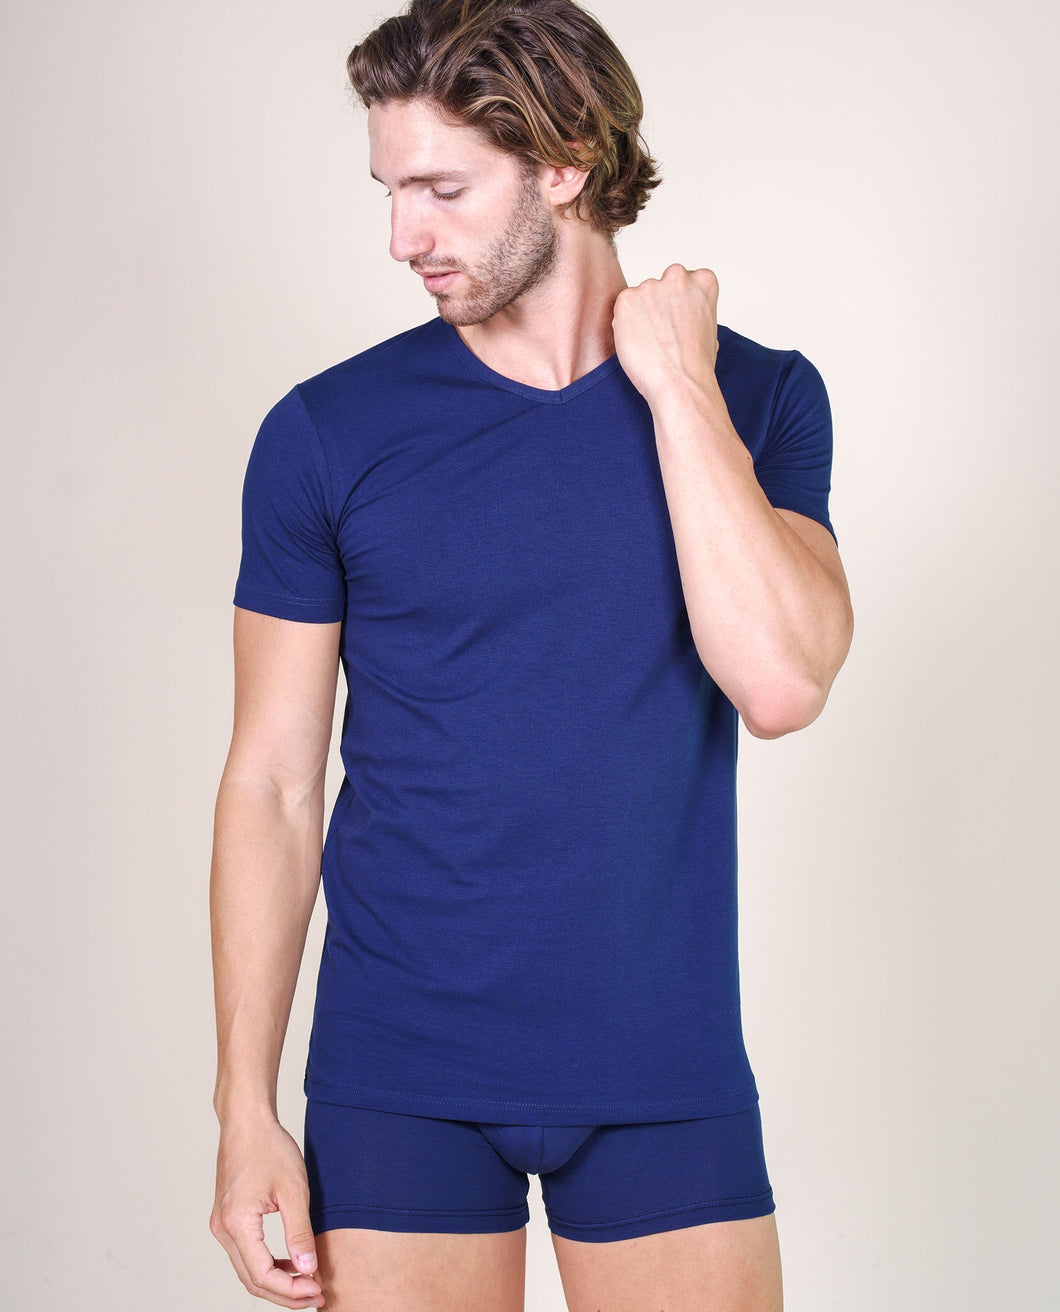 BASIC COTTON Free Spirit Premium Quality Cotton Men's V - Neck T-Shirt Proudly Made in Italy